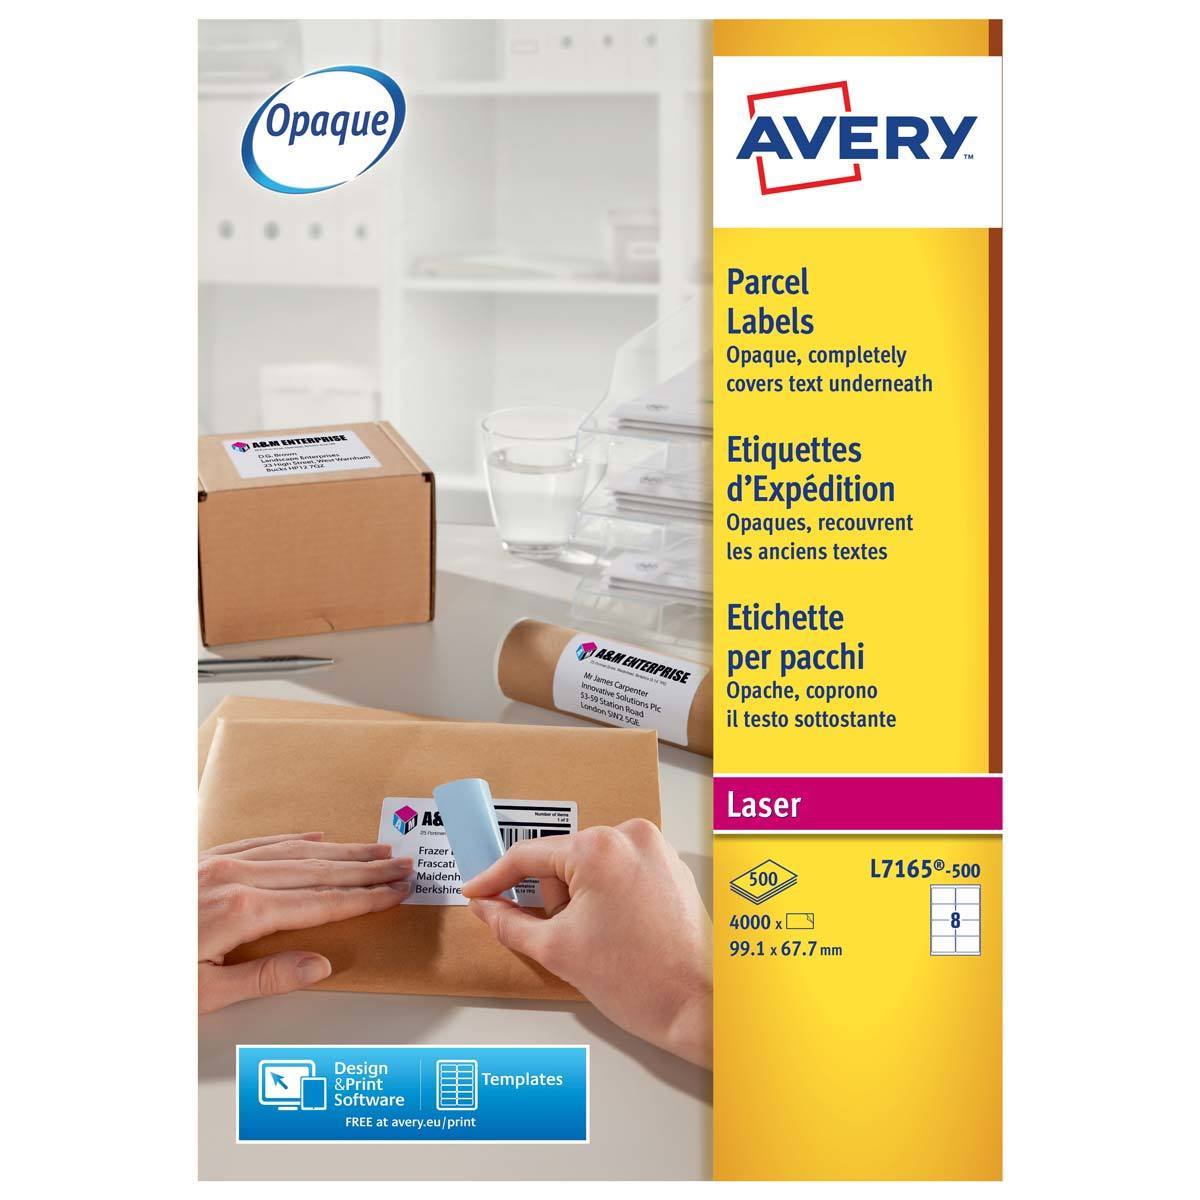 Avery Laser Parcel Labels 20.20 x 20.20mm, L202065-20, Pack of 20 For 99.1 X 67.7 Mm Label Template